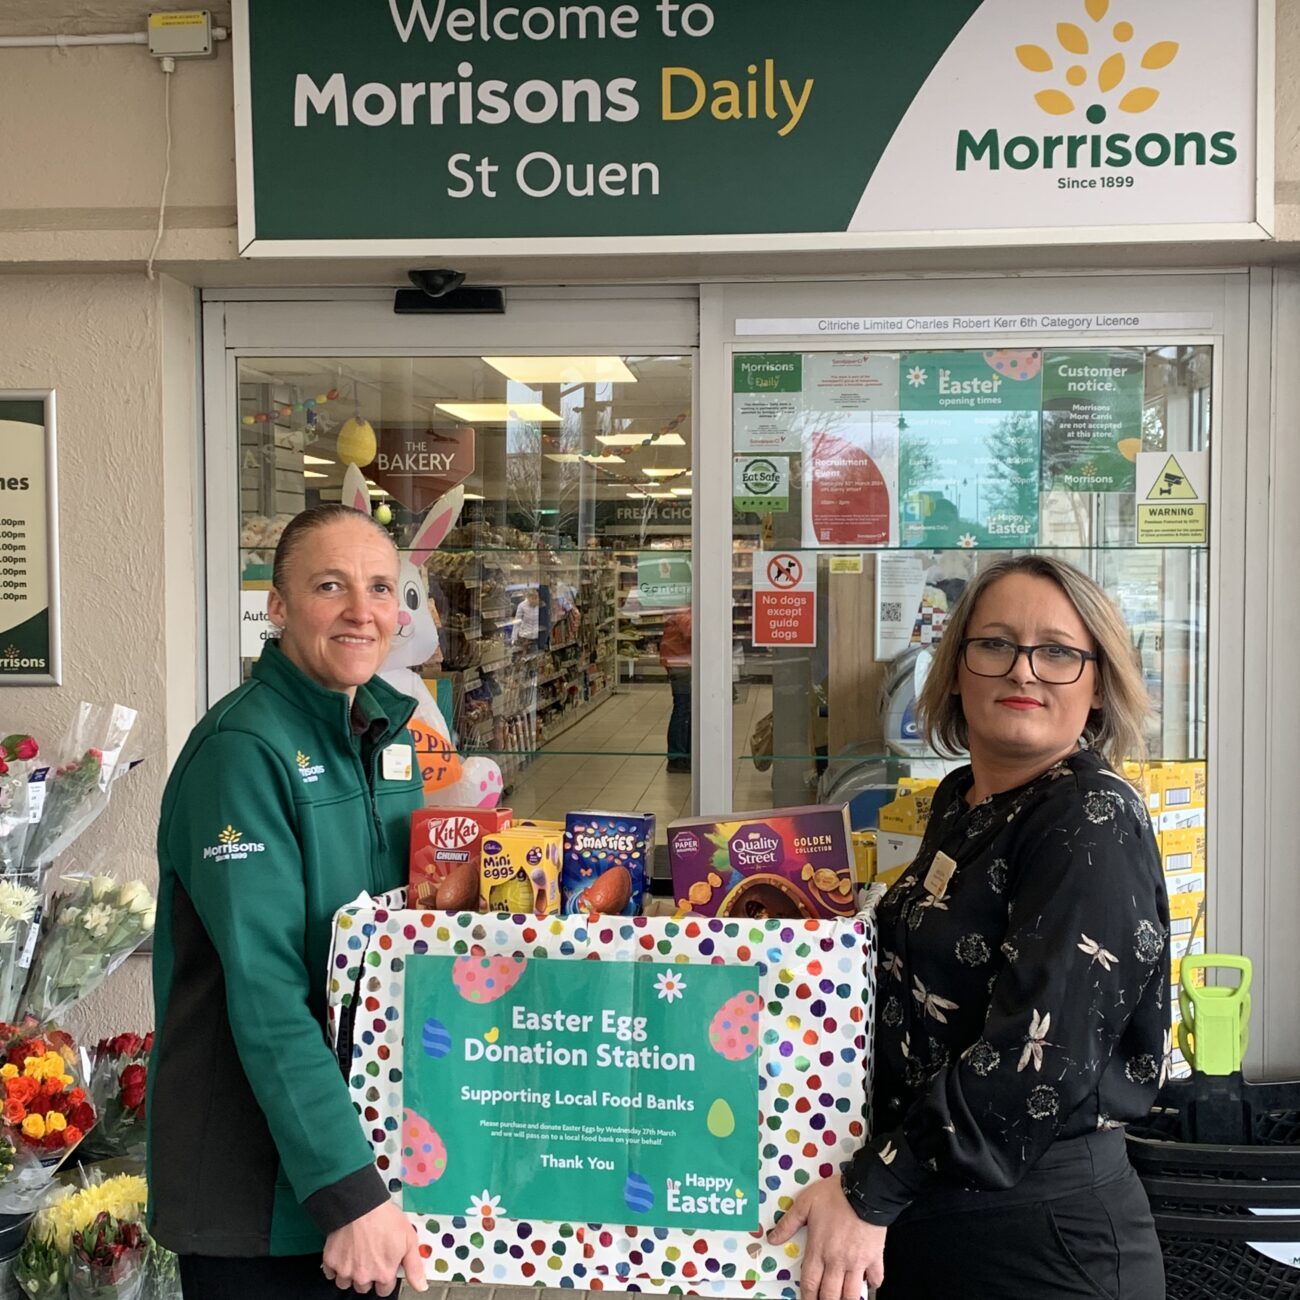 Morrisons staff donate Easter eggs to local community food banks